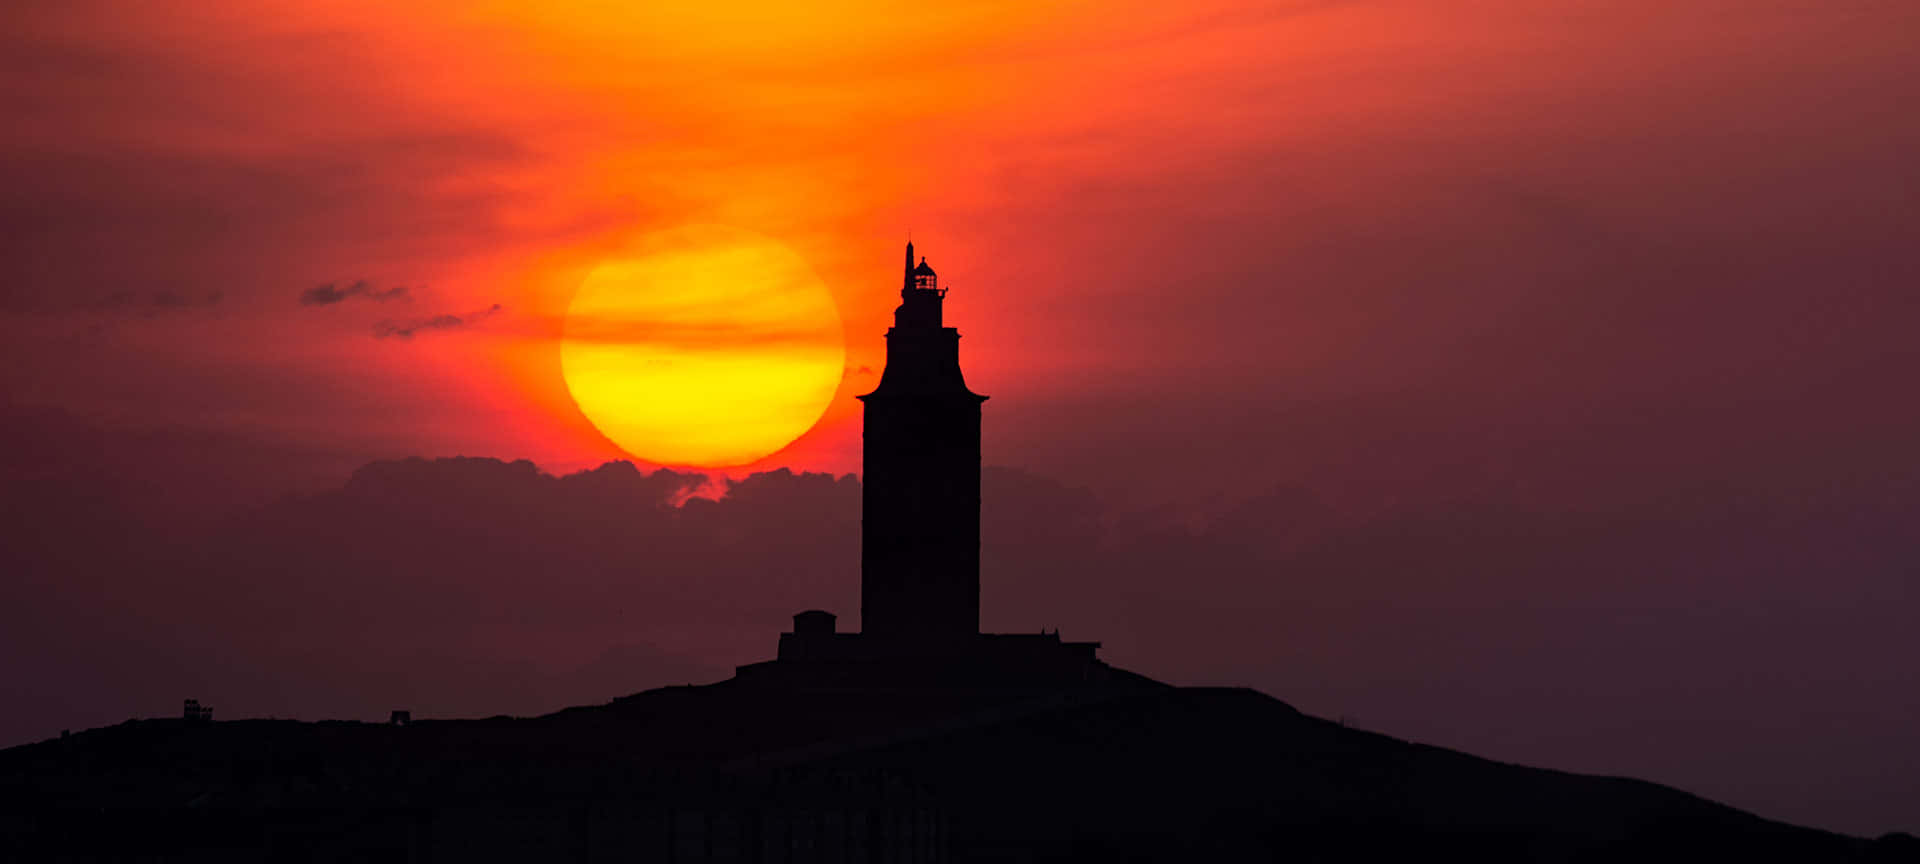 Red Aesthetic Sunset With Tower Of Hercules Wallpaper